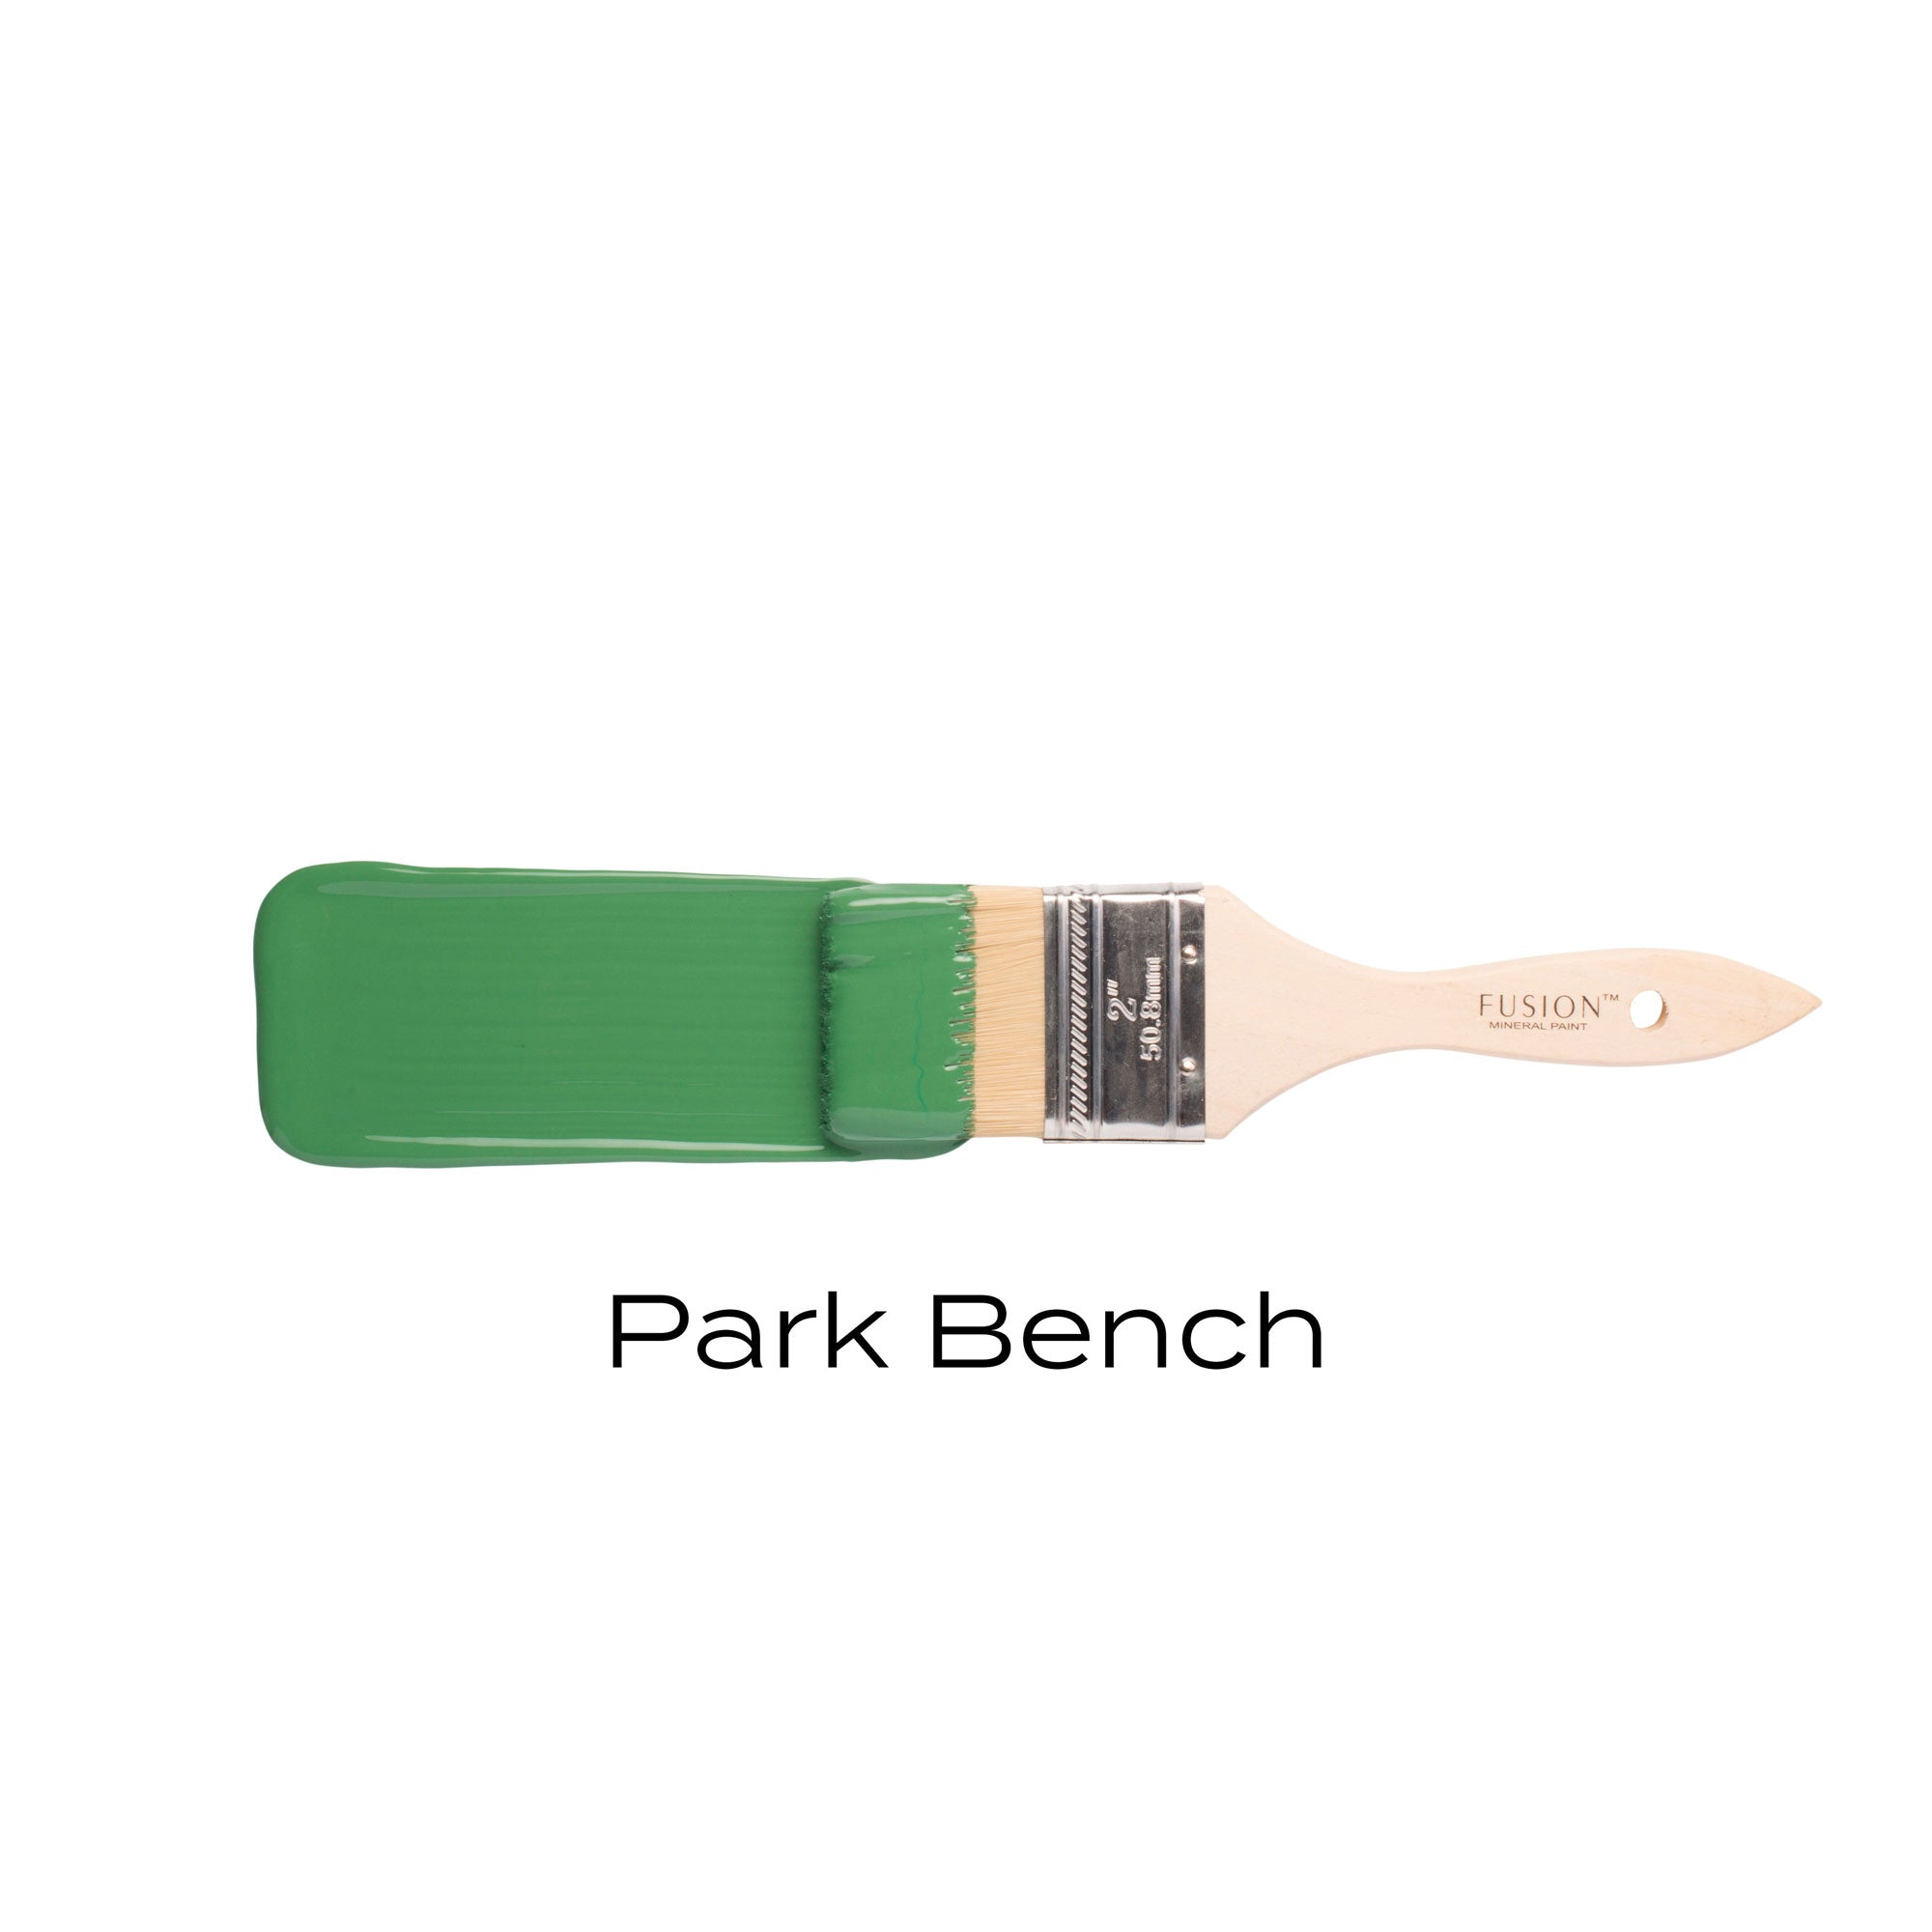 Fusion_Mineral_Paint_Park_Bench_Brush.jpg